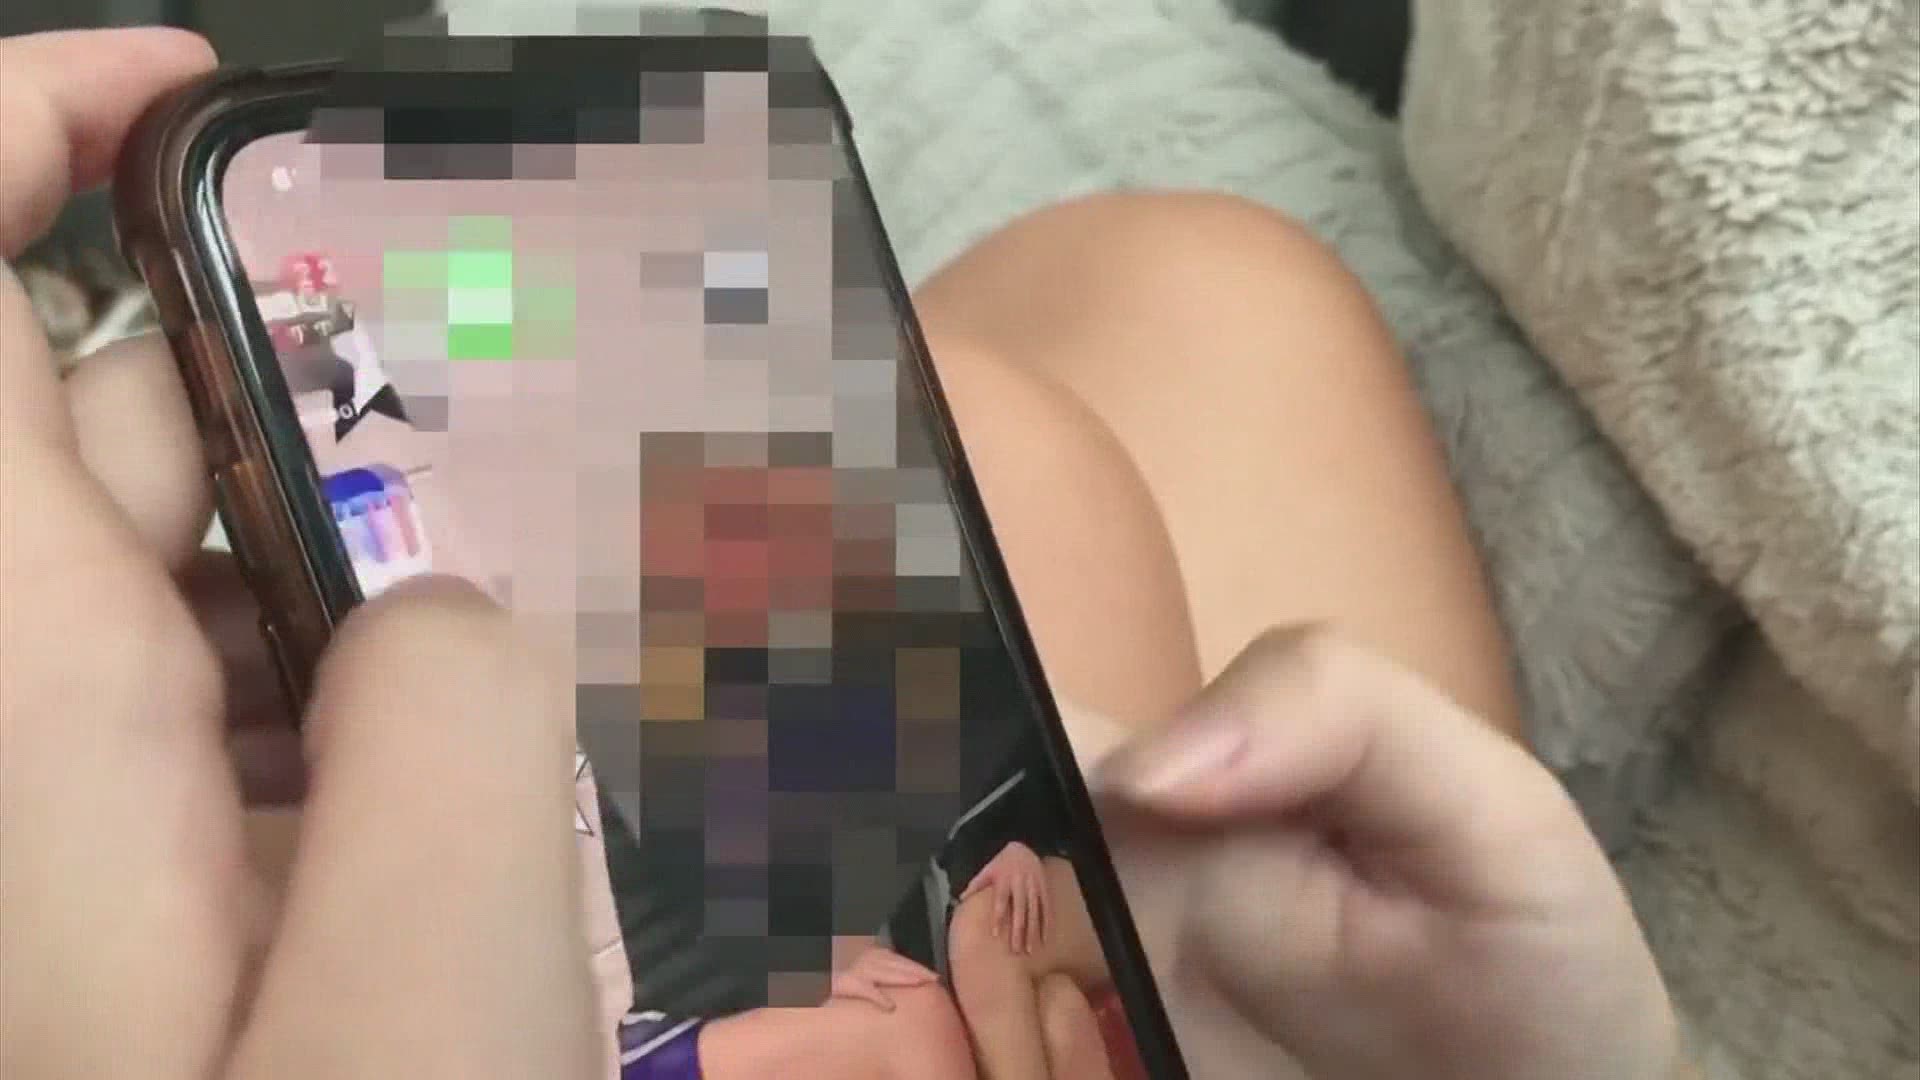 Authorities say as more schools are turning to virtual learning, there's been an uptick in predators attempting to make contact with minors online.